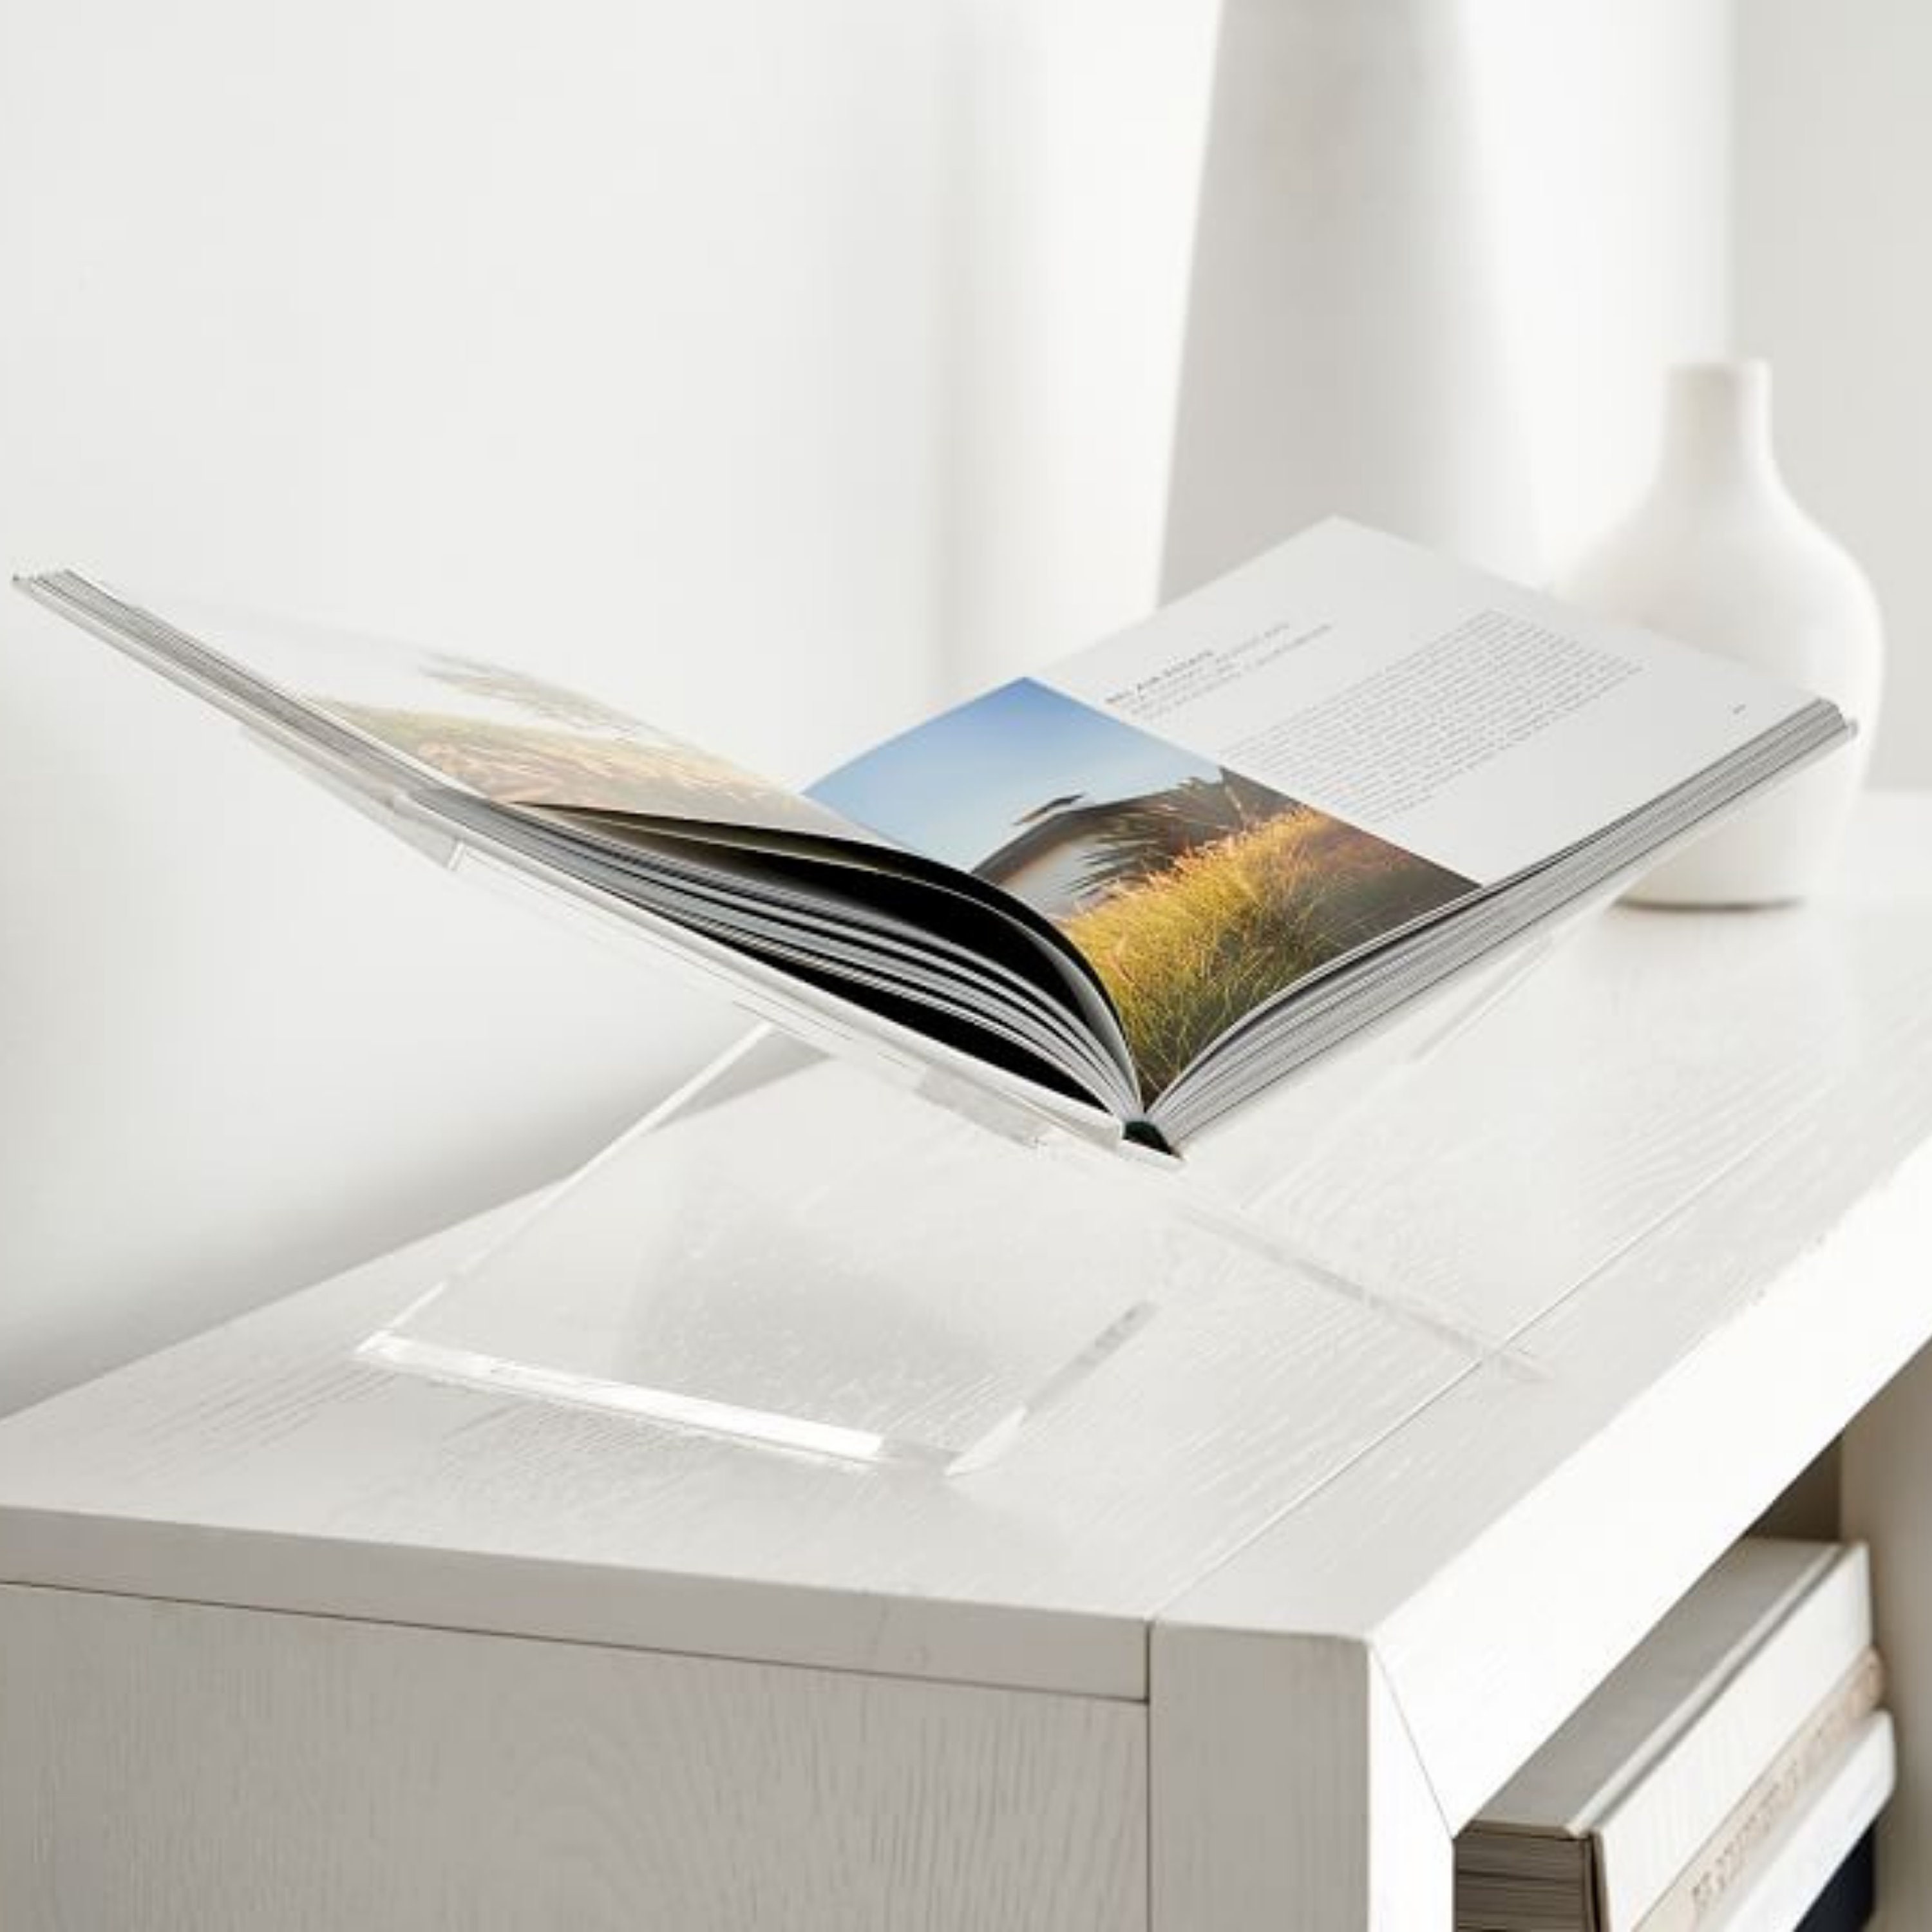 Top 10 acrylic book stand ideas and inspiration